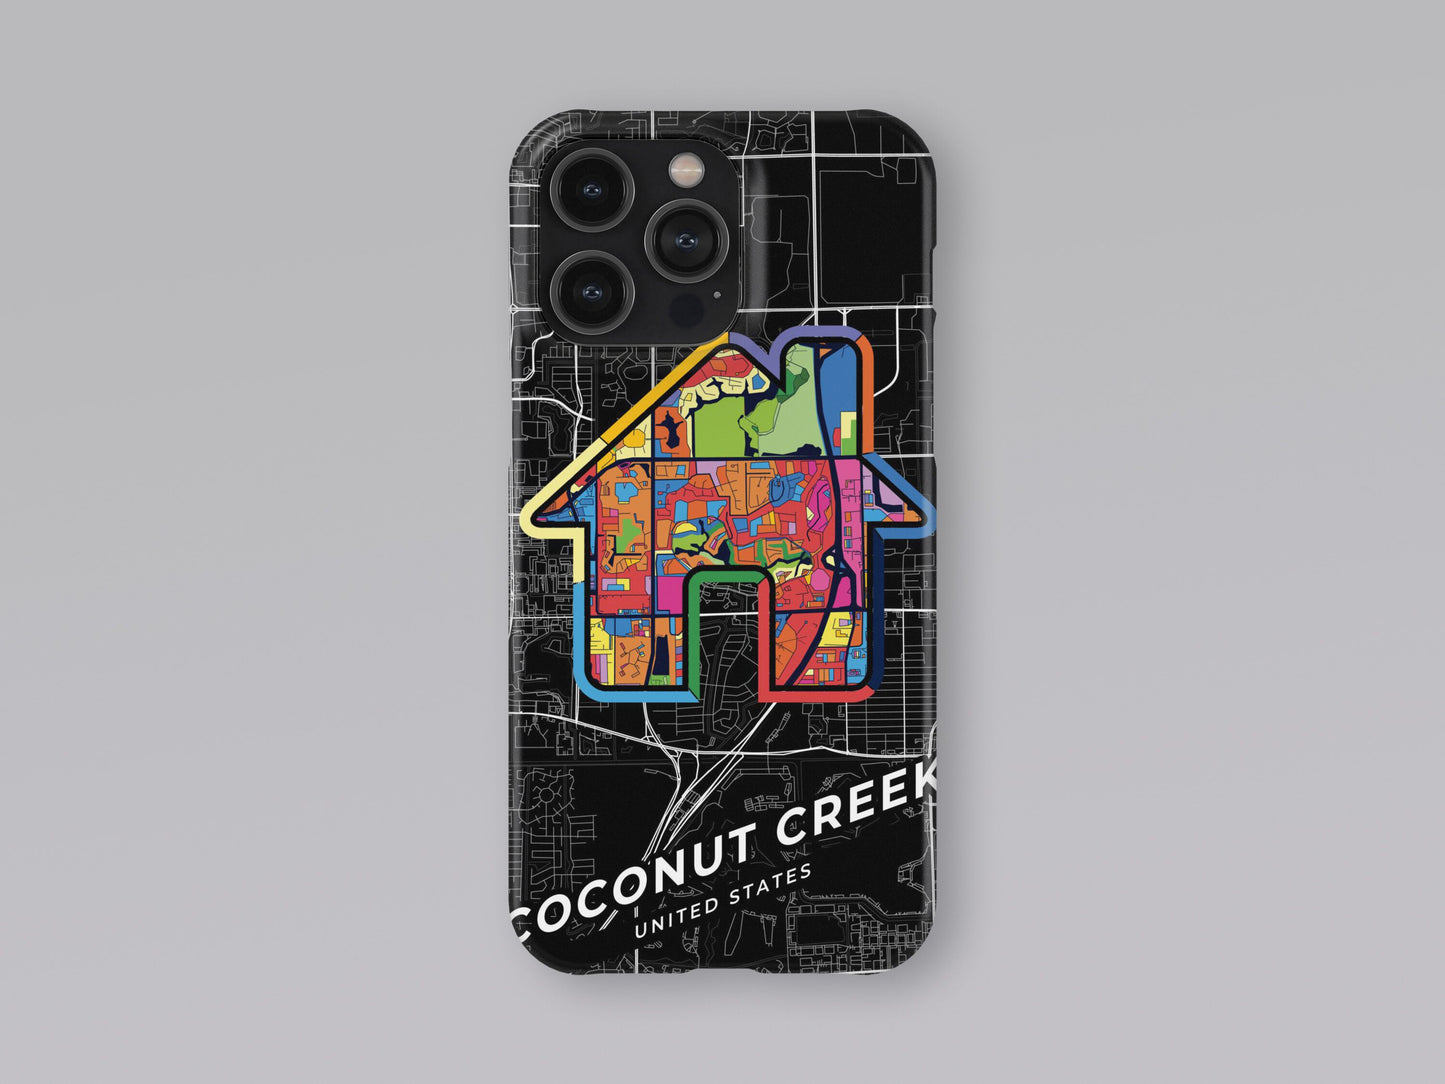 Coconut Creek Florida slim phone case with colorful icon. Birthday, wedding or housewarming gift. Couple match cases. 3